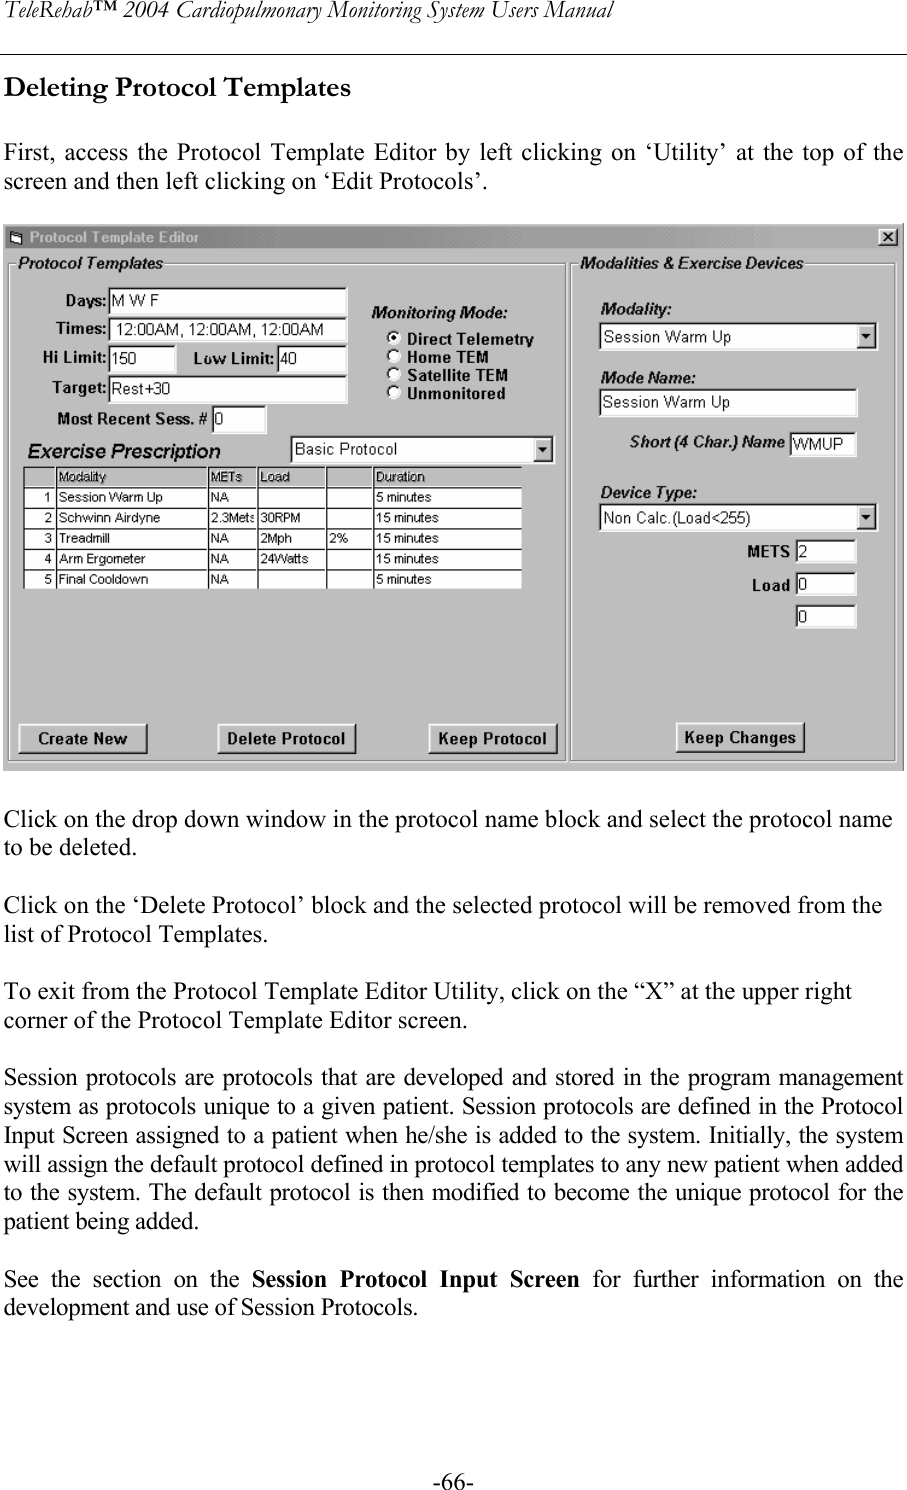 TeleRehab™ 2004 Cardiopulmonary Monitoring System Users Manual    -66-Deleting Protocol Templates  First, access the Protocol Template Editor by left clicking on ‘Utility’ at the top of the screen and then left clicking on ‘Edit Protocols’.    Click on the drop down window in the protocol name block and select the protocol name to be deleted.  Click on the ‘Delete Protocol’ block and the selected protocol will be removed from the list of Protocol Templates.  To exit from the Protocol Template Editor Utility, click on the “X” at the upper right corner of the Protocol Template Editor screen.  Session protocols are protocols that are developed and stored in the program management system as protocols unique to a given patient. Session protocols are defined in the Protocol Input Screen assigned to a patient when he/she is added to the system. Initially, the system will assign the default protocol defined in protocol templates to any new patient when added to the system. The default protocol is then modified to become the unique protocol for the patient being added.  See the section on the Session Protocol Input Screen for further information on the development and use of Session Protocols. 